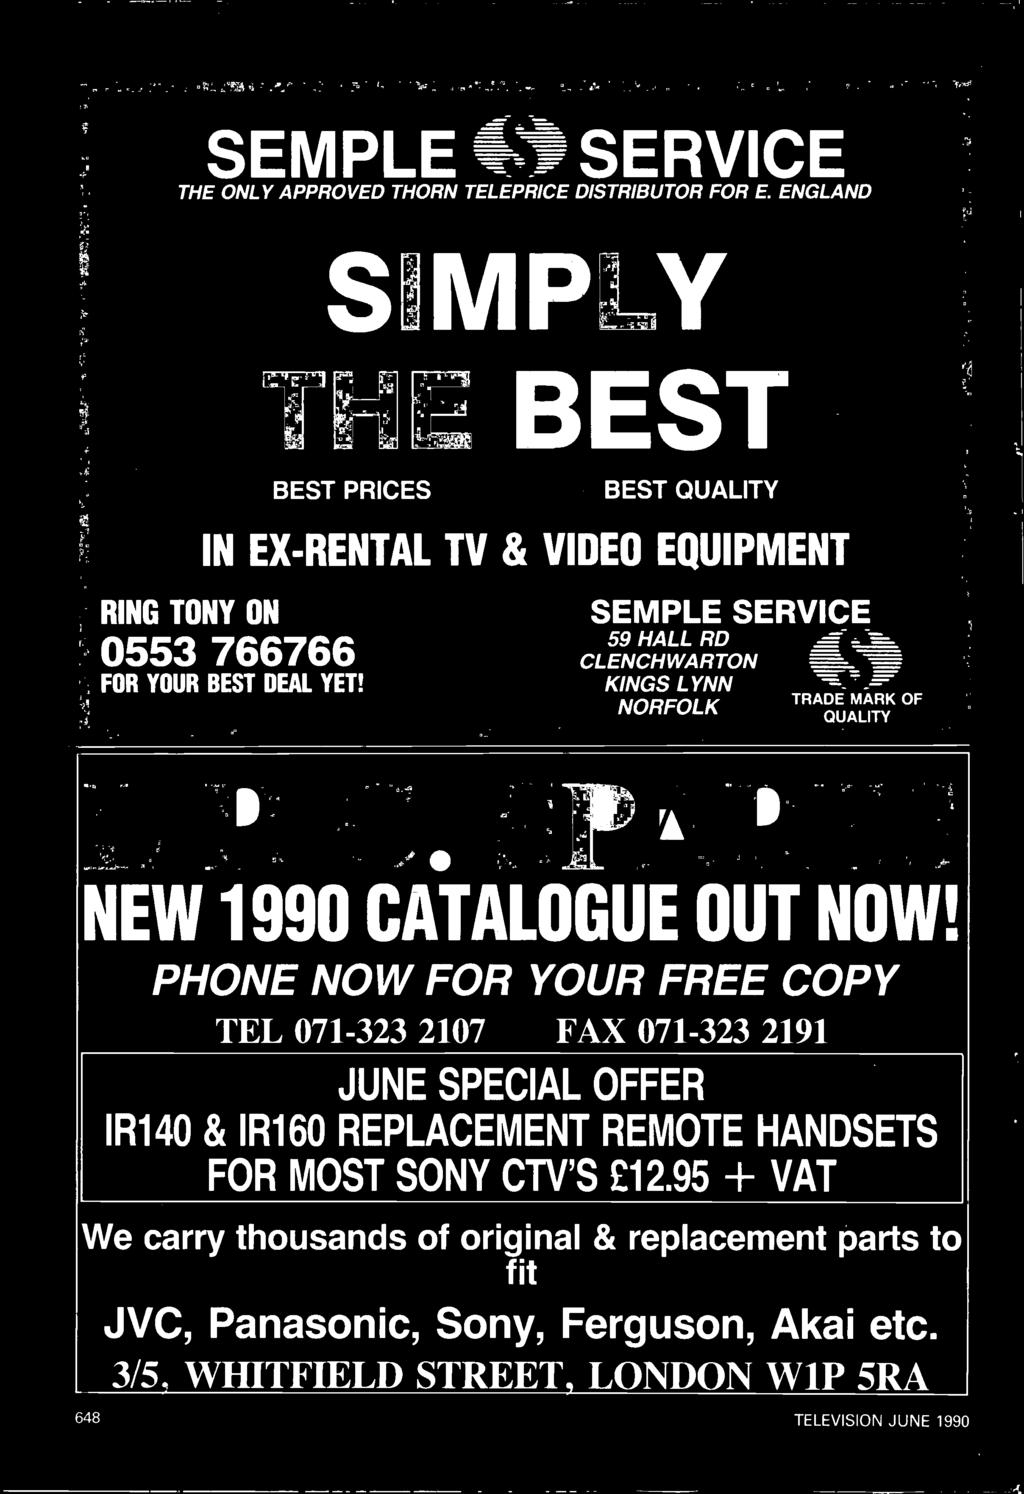 SEMPLE SERVICE 59 HALL RD CLENCHWARTON KINGS LYNN NORFOLK TRADE MARK OF QUALITY L.R.C. SPARES NEW 1990 CATALOGUE OUT NOW!